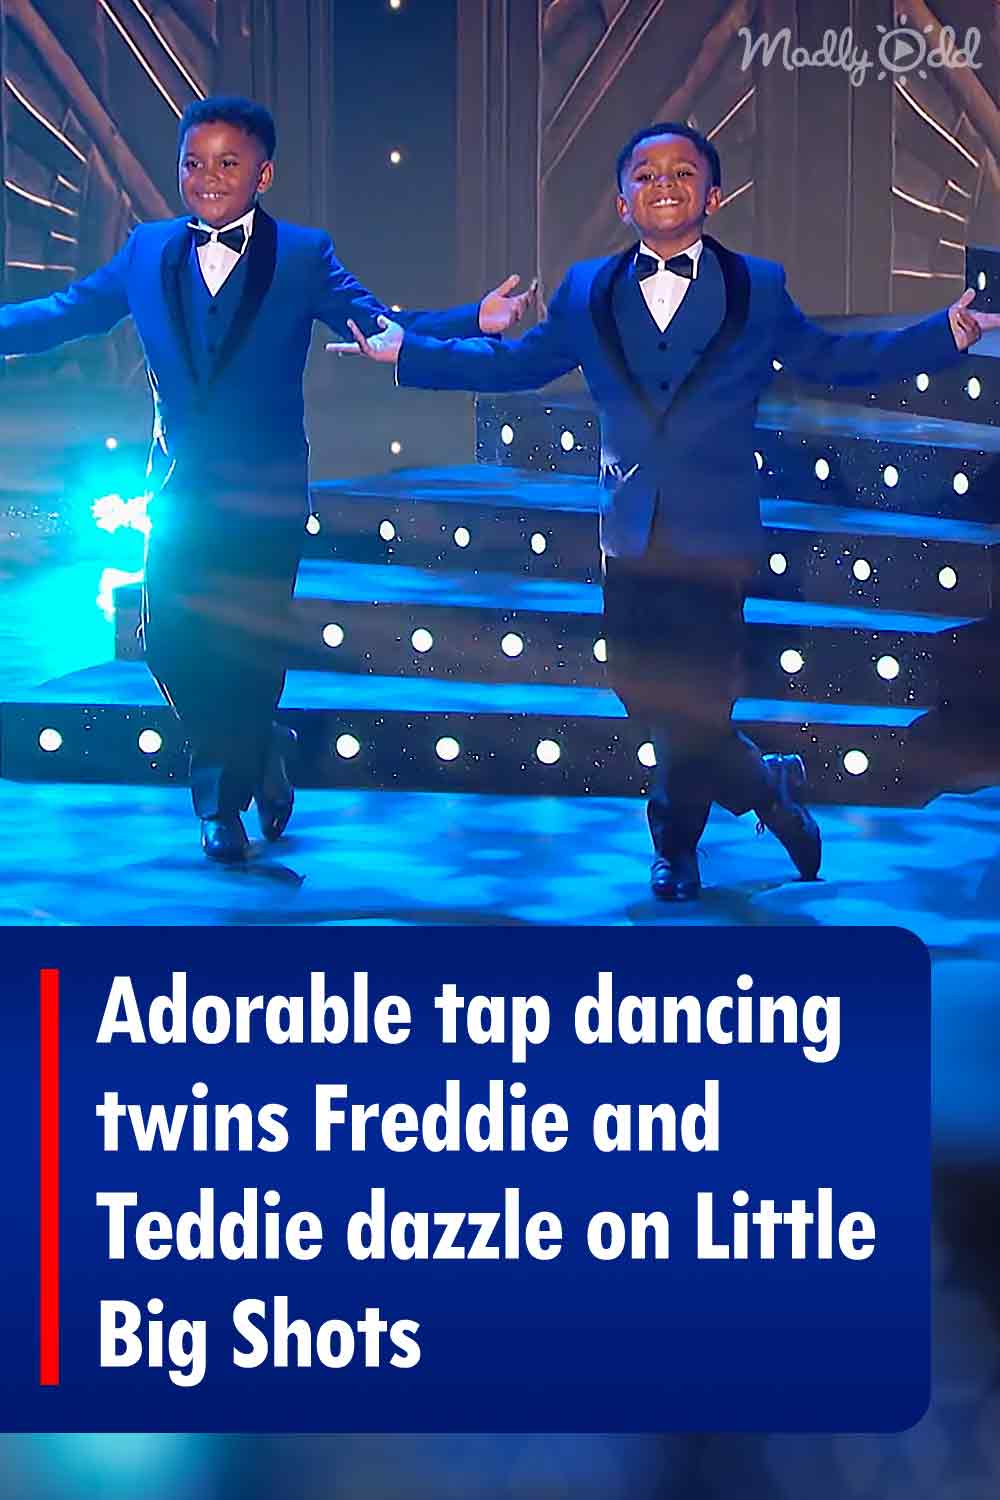 Adorable tap dancing twins Freddie and Teddie dazzle on Little Big Shots